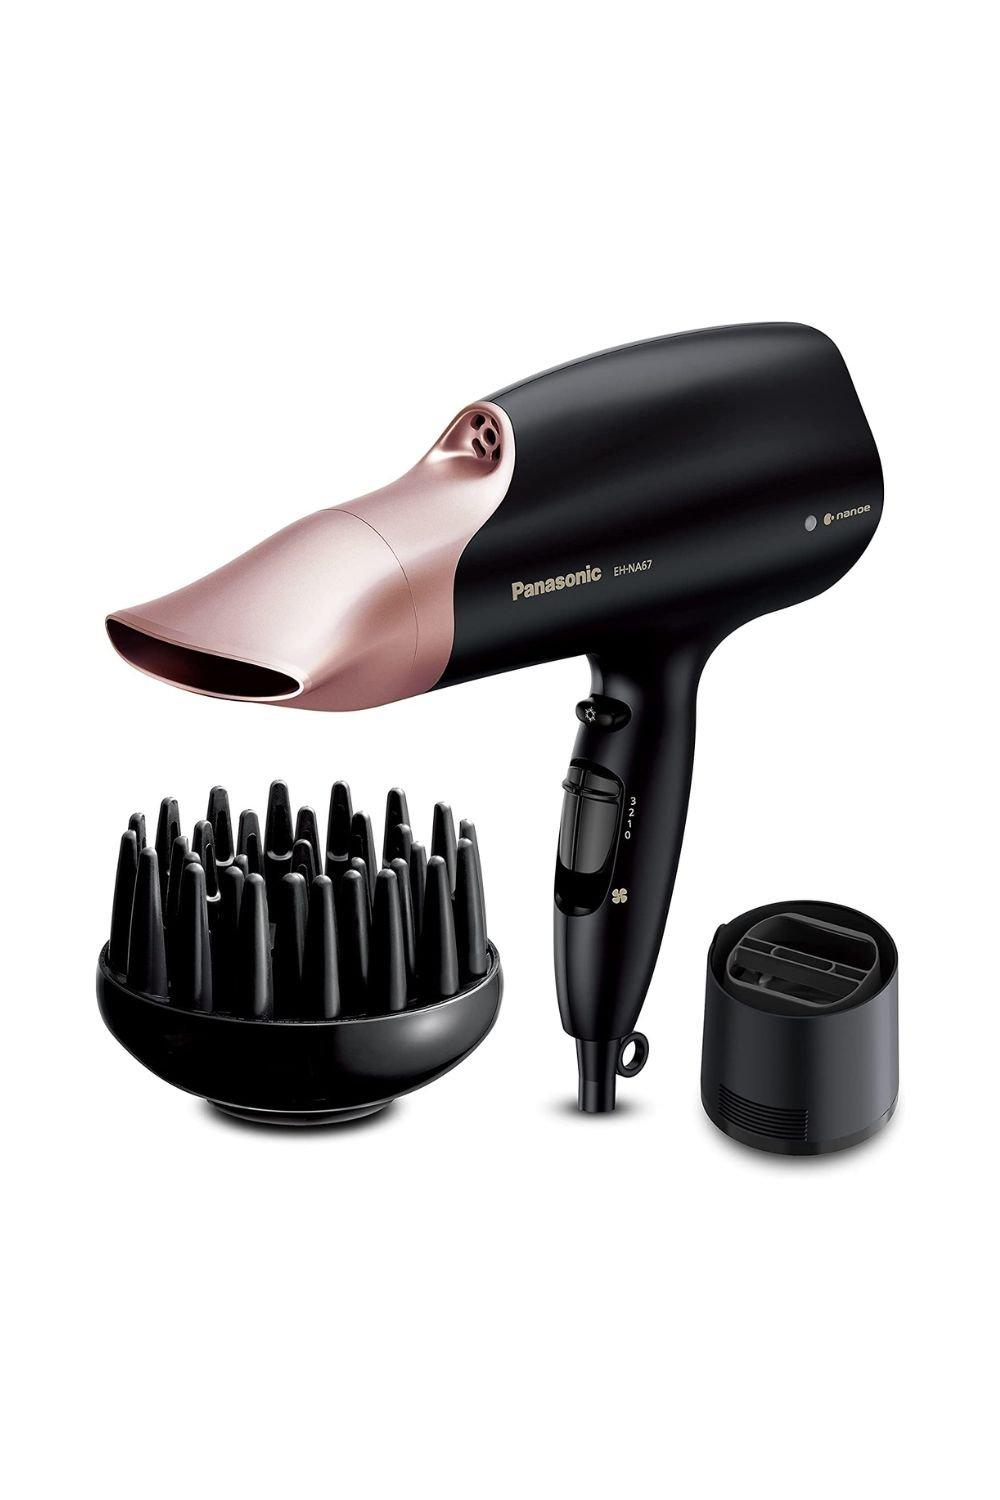 Hair Styling Tools | EH-NA67 nanoe Hair Dryer with Diffuser and Oscillating  Nozzle for Scalp Protection (Pink Gold) | Panasonic | Föhn